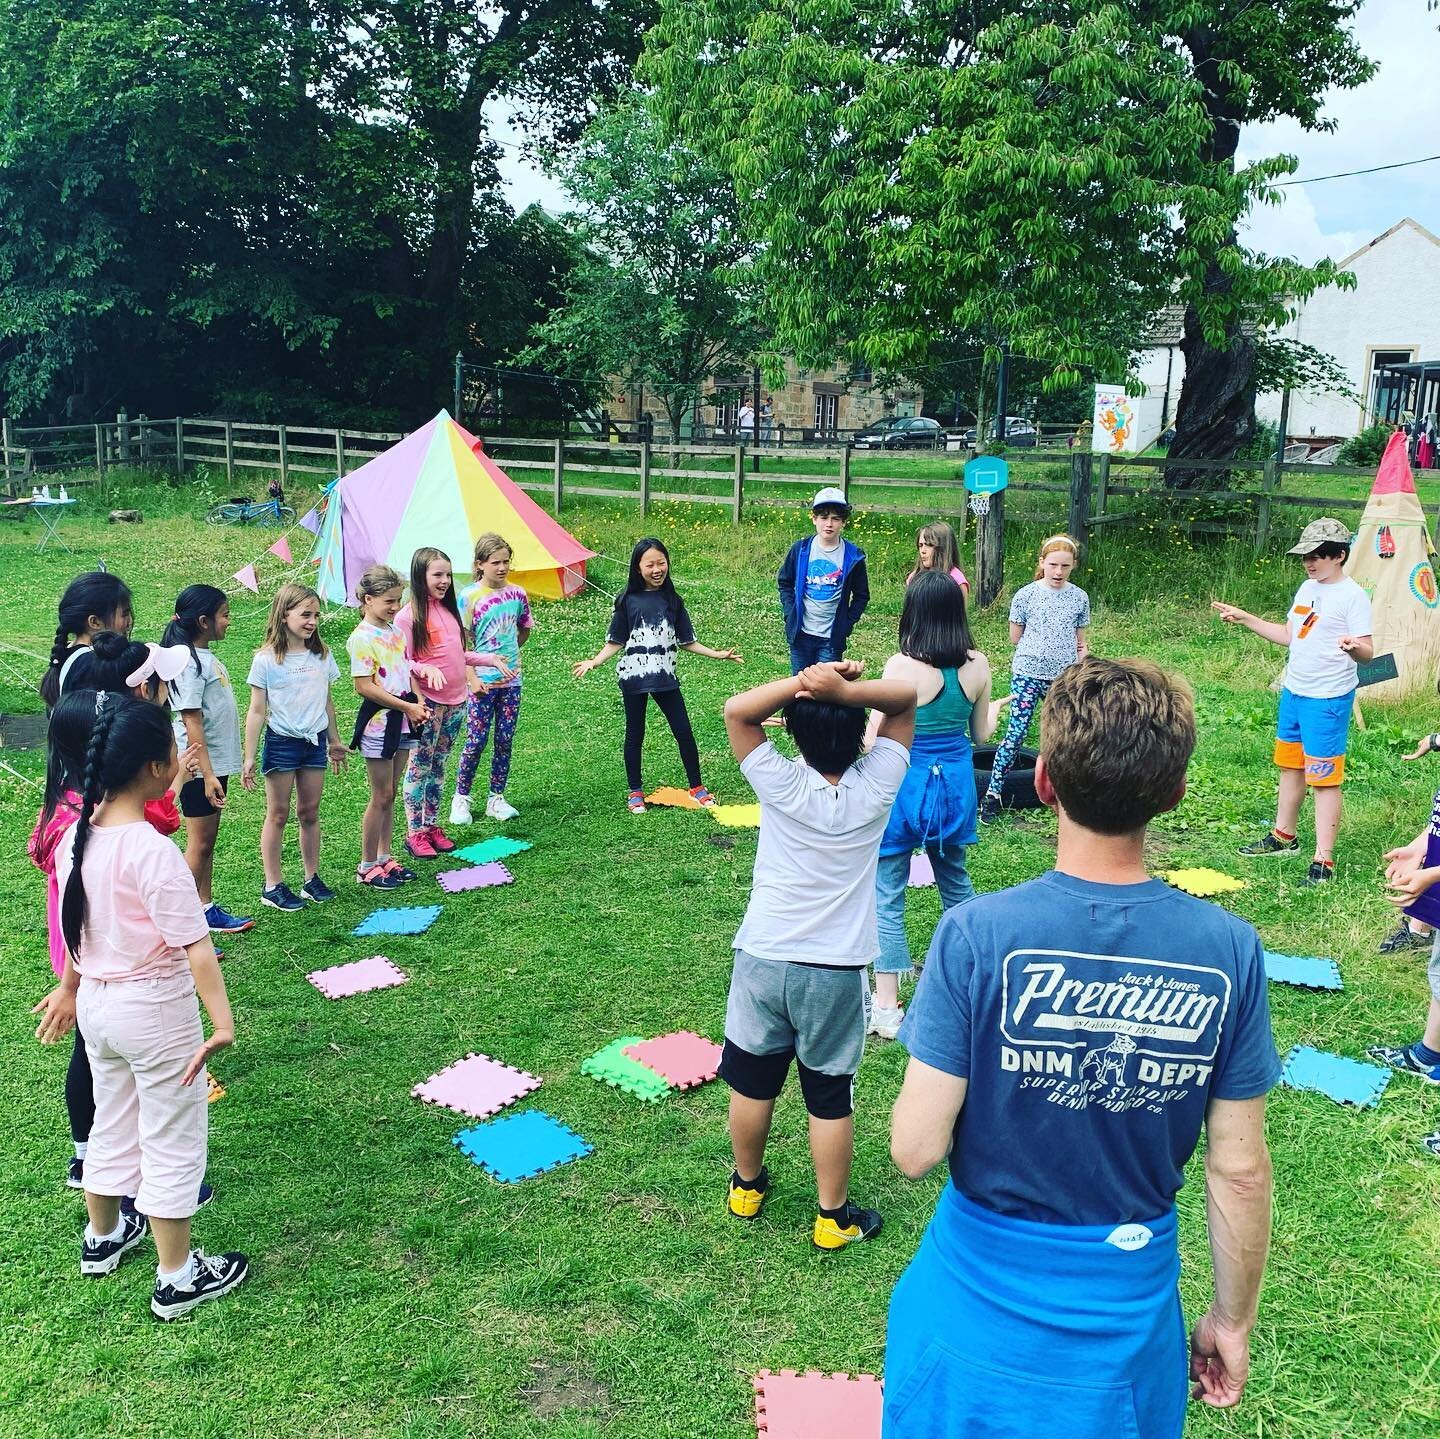 News! MORE CLASSES AVAILABLE!! 🎉

Firstly, we'd like to say thank you to all you wonderful grown-ups and your amazing young people for making last week's Summer Drama Camp so special. It was so much fun that even the sun came along every day! 🌞

We